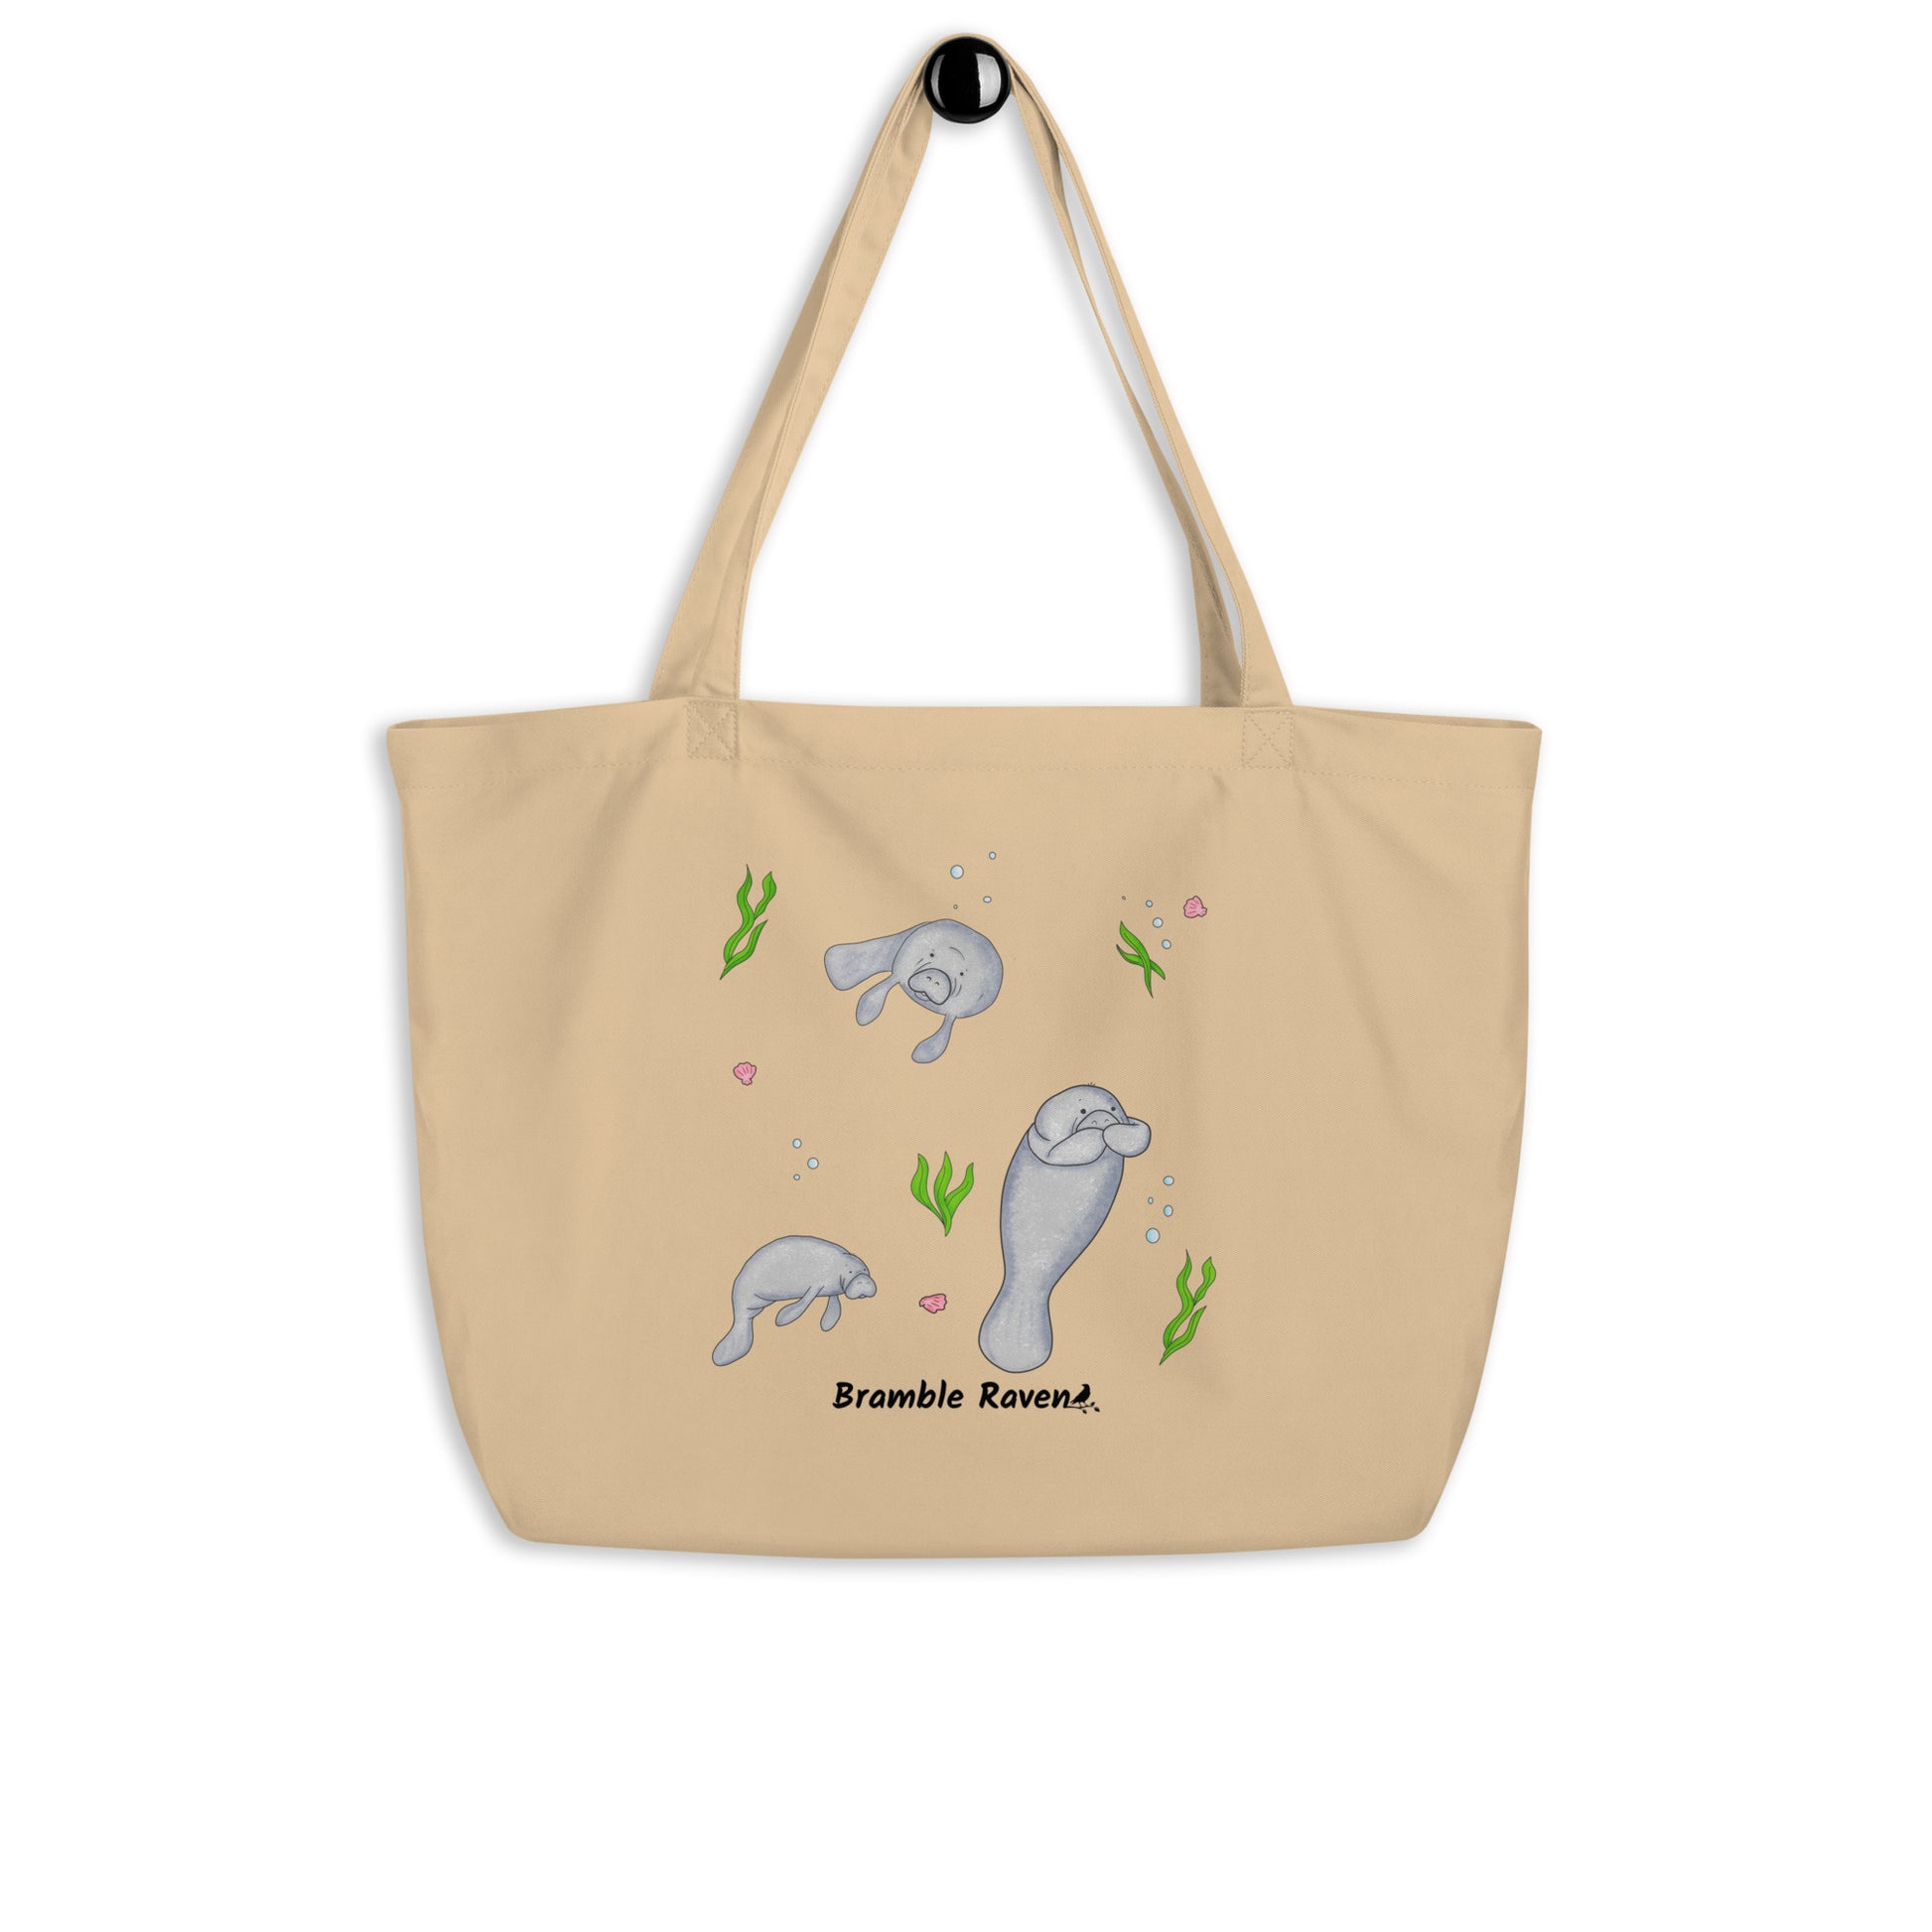 20″ × 14″ × 5″ 100% organic cotton tote bag. Features three manatees with accents of seashells, seaweed, and bubbles. Oyster colored fabric with dual handles. Shown hanging on a knob.